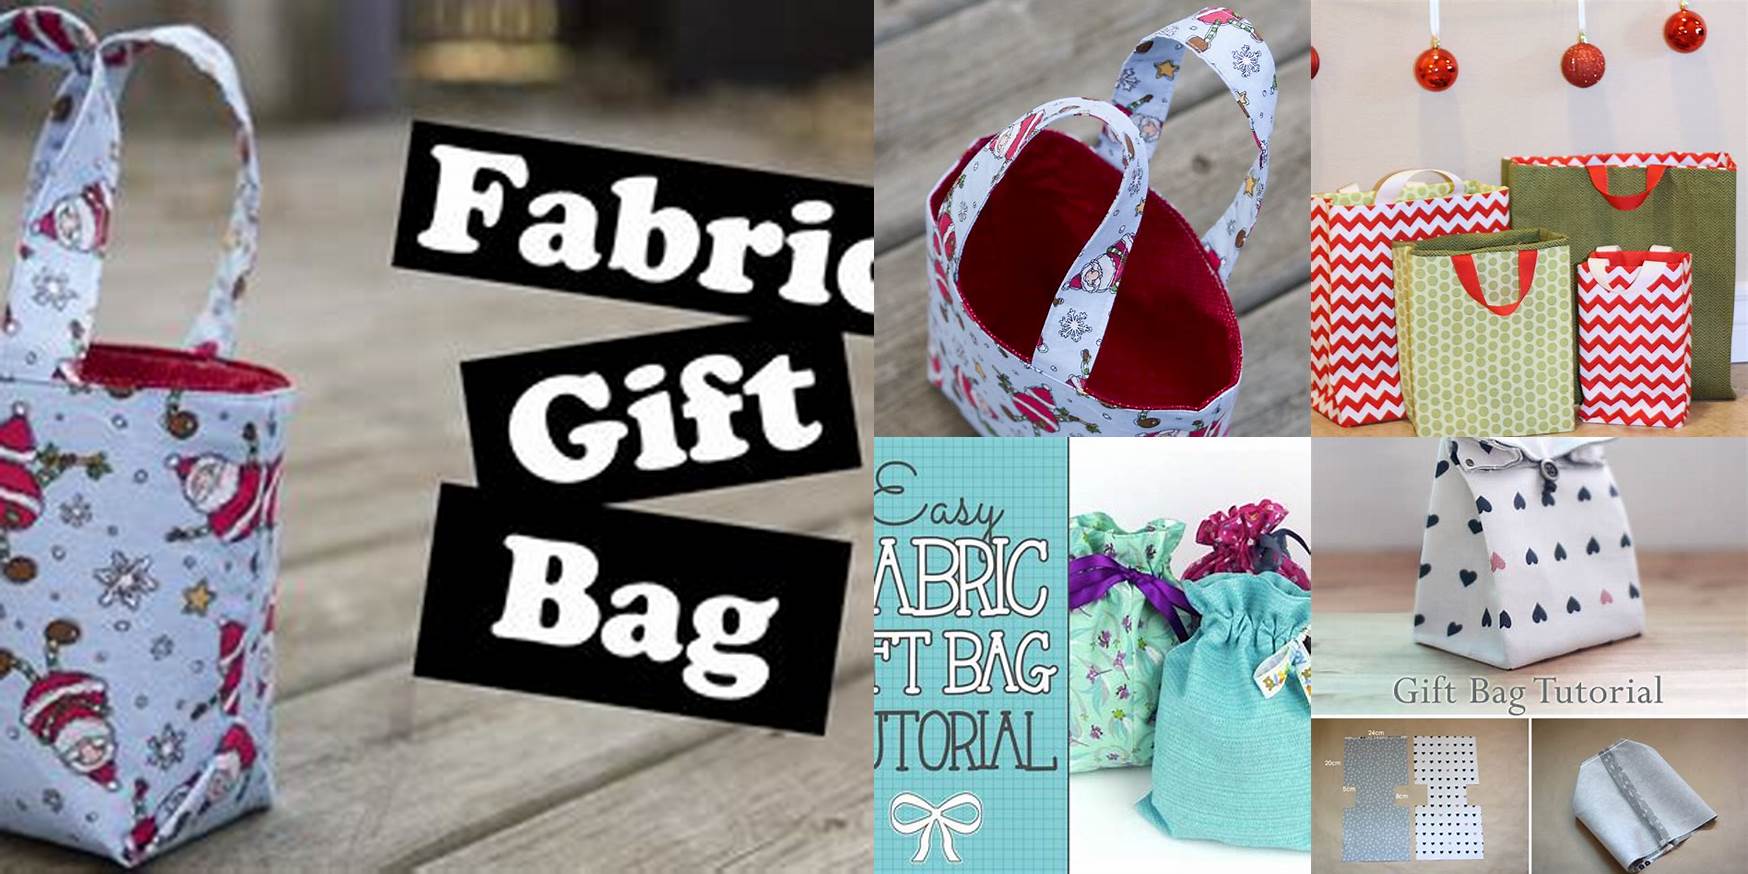 How To Make Gift Bags From Fabric